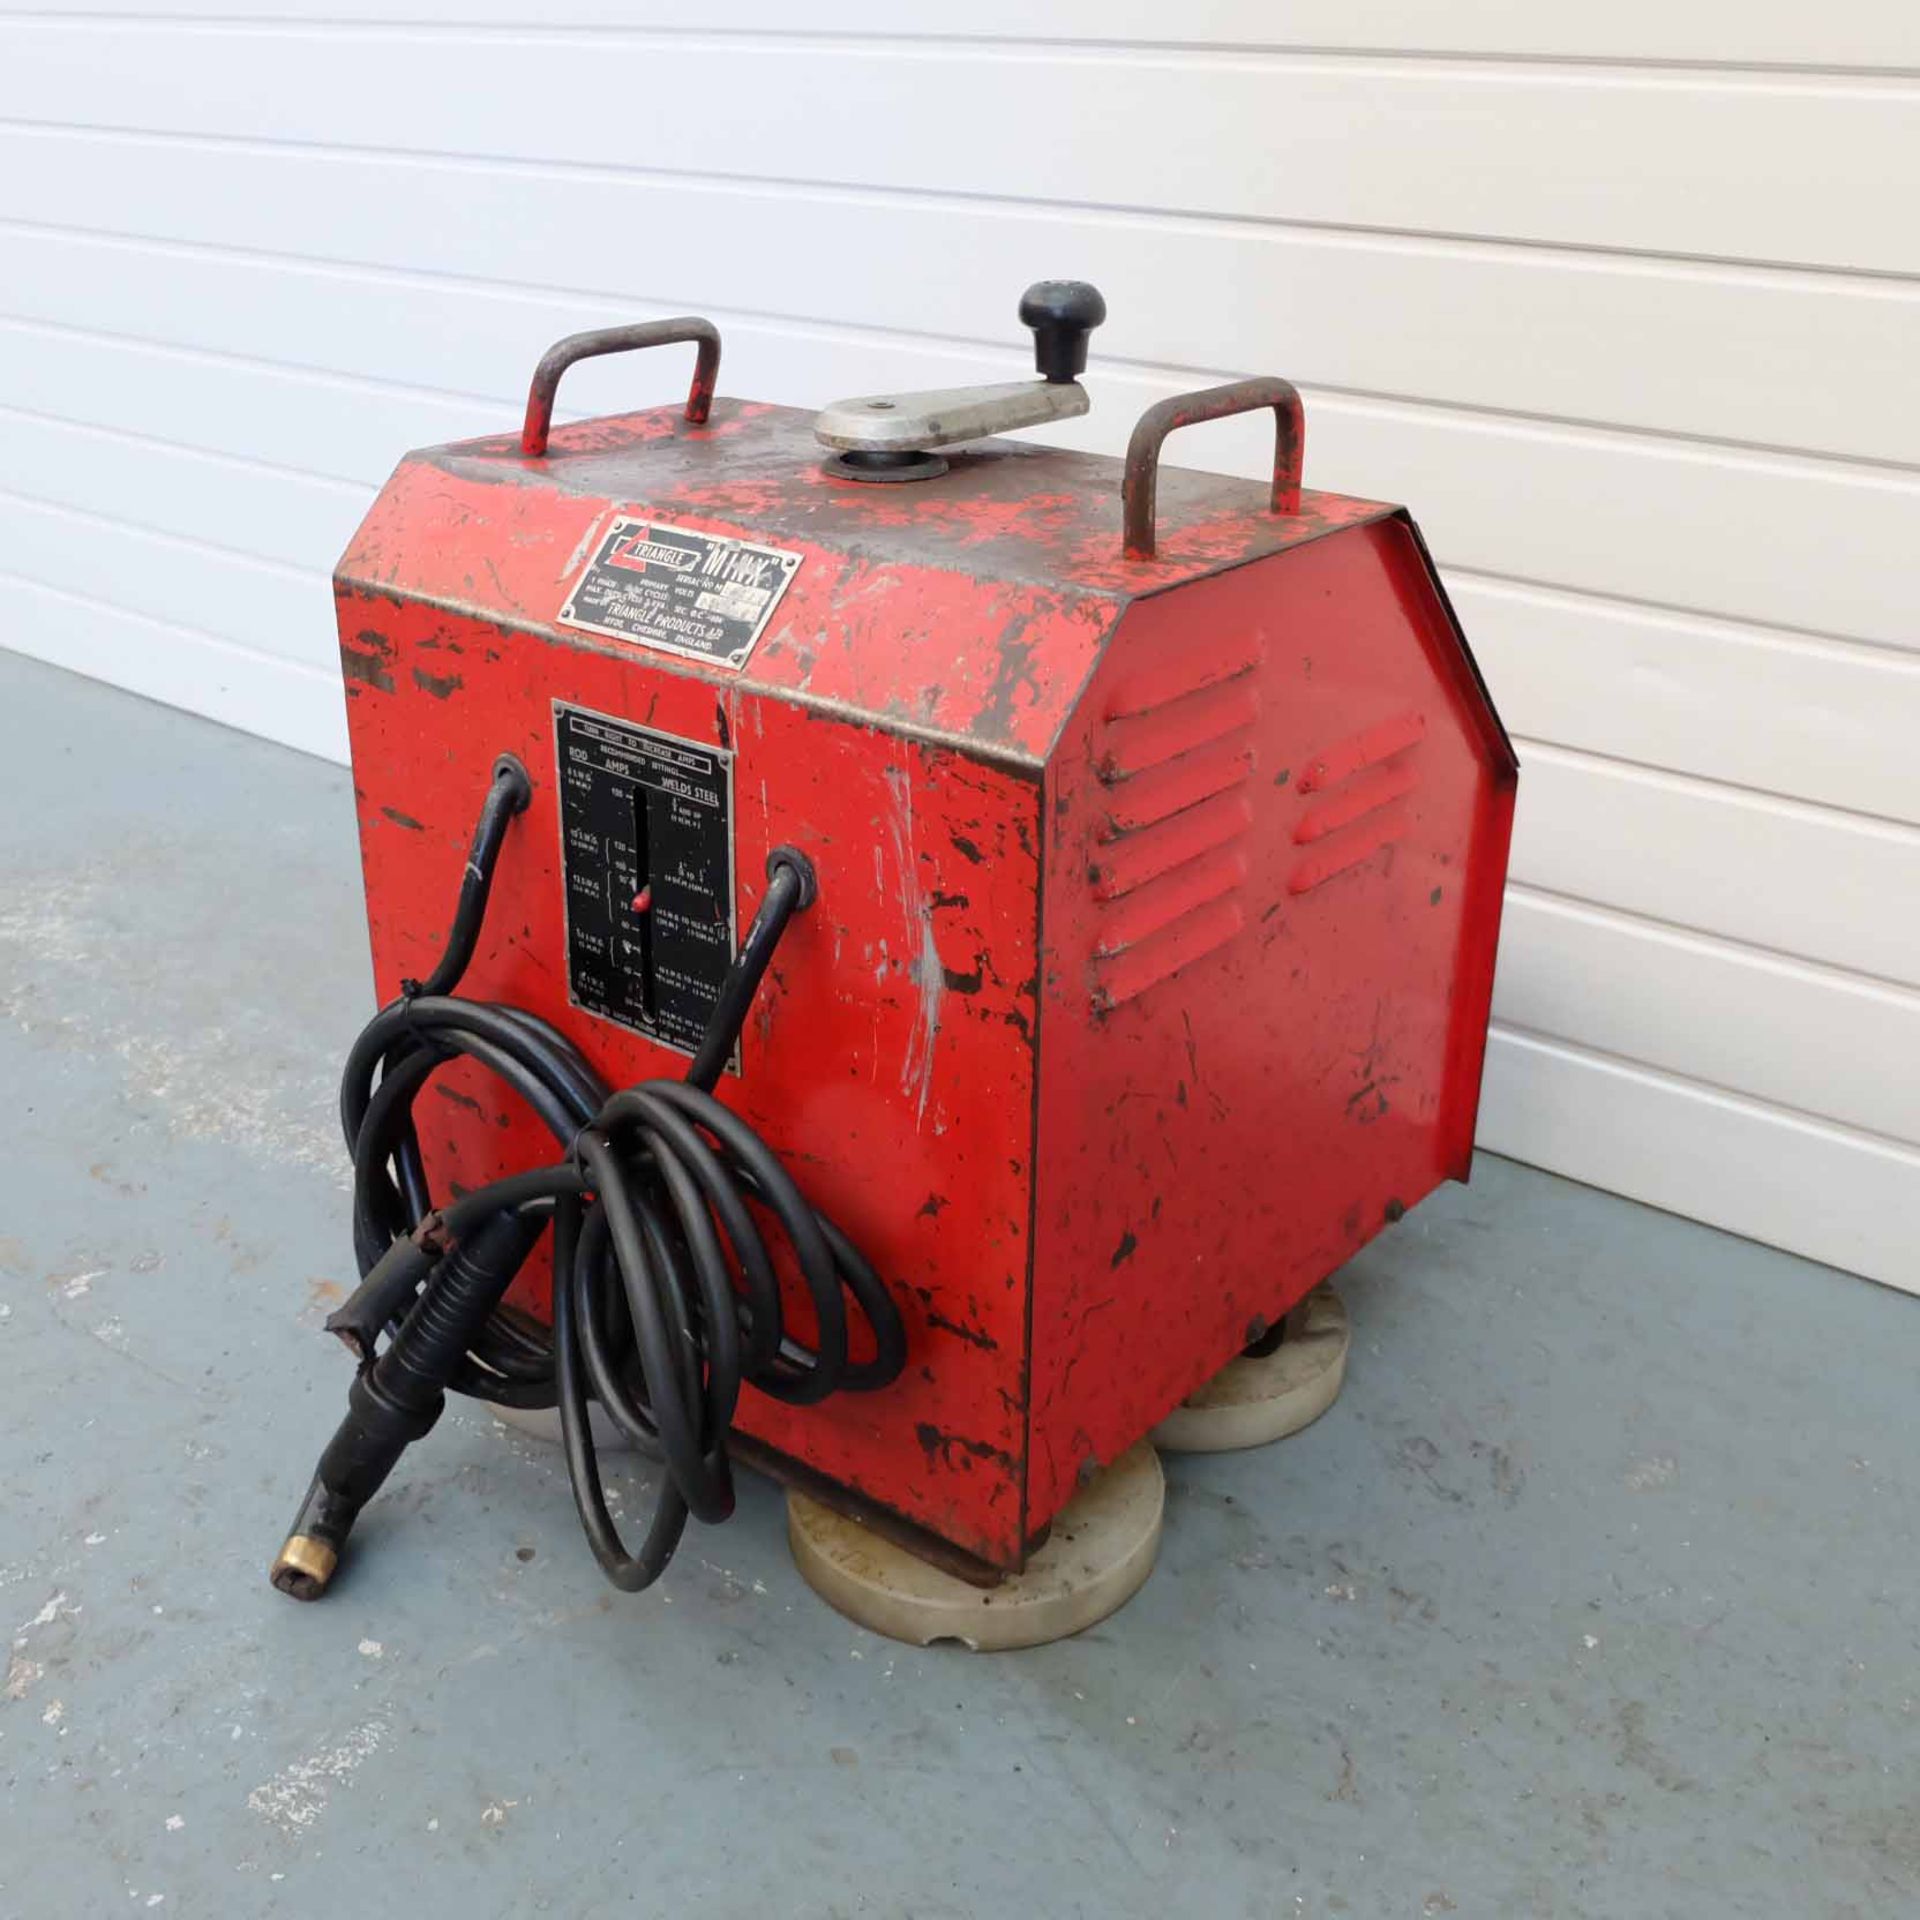 Triangle 'Minx' 1 Phase Stick Welder. Range 30 - 50Amps. Max Duty Cycle 3KVA. Primary Volts 200 - 48 - Image 3 of 7